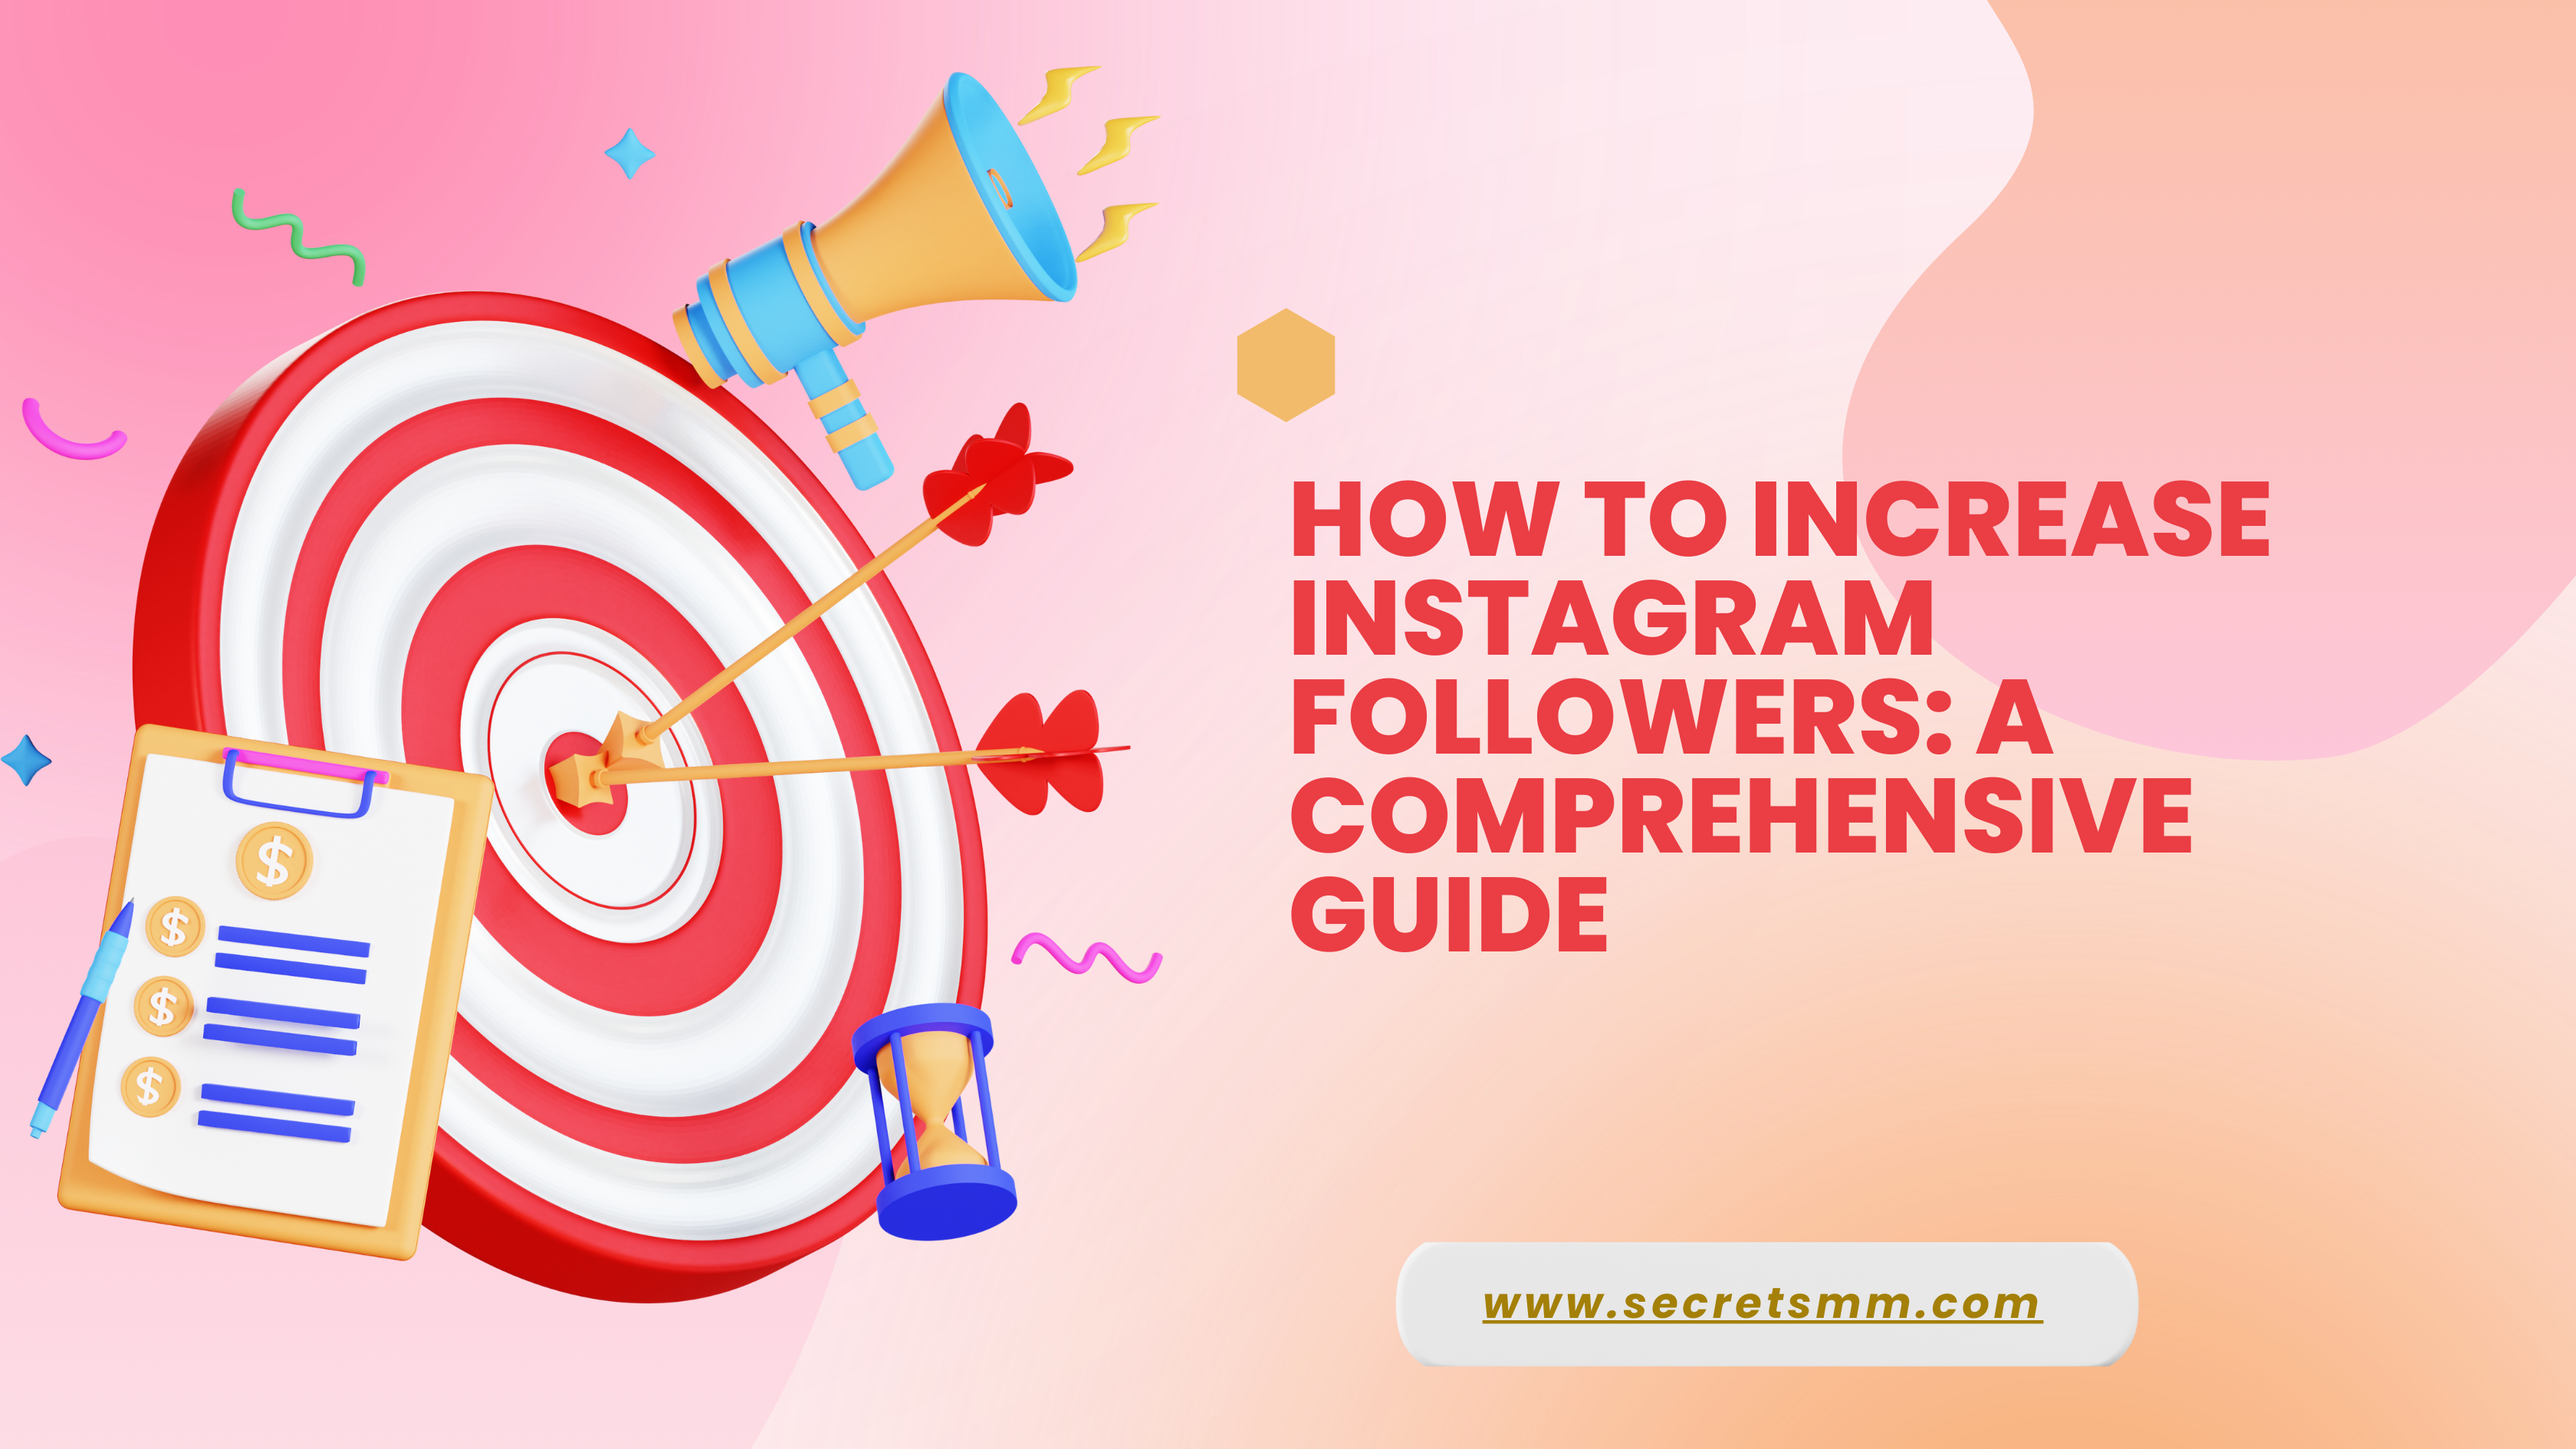 How to Increase Instagram Followers: A Comprehensive Guide